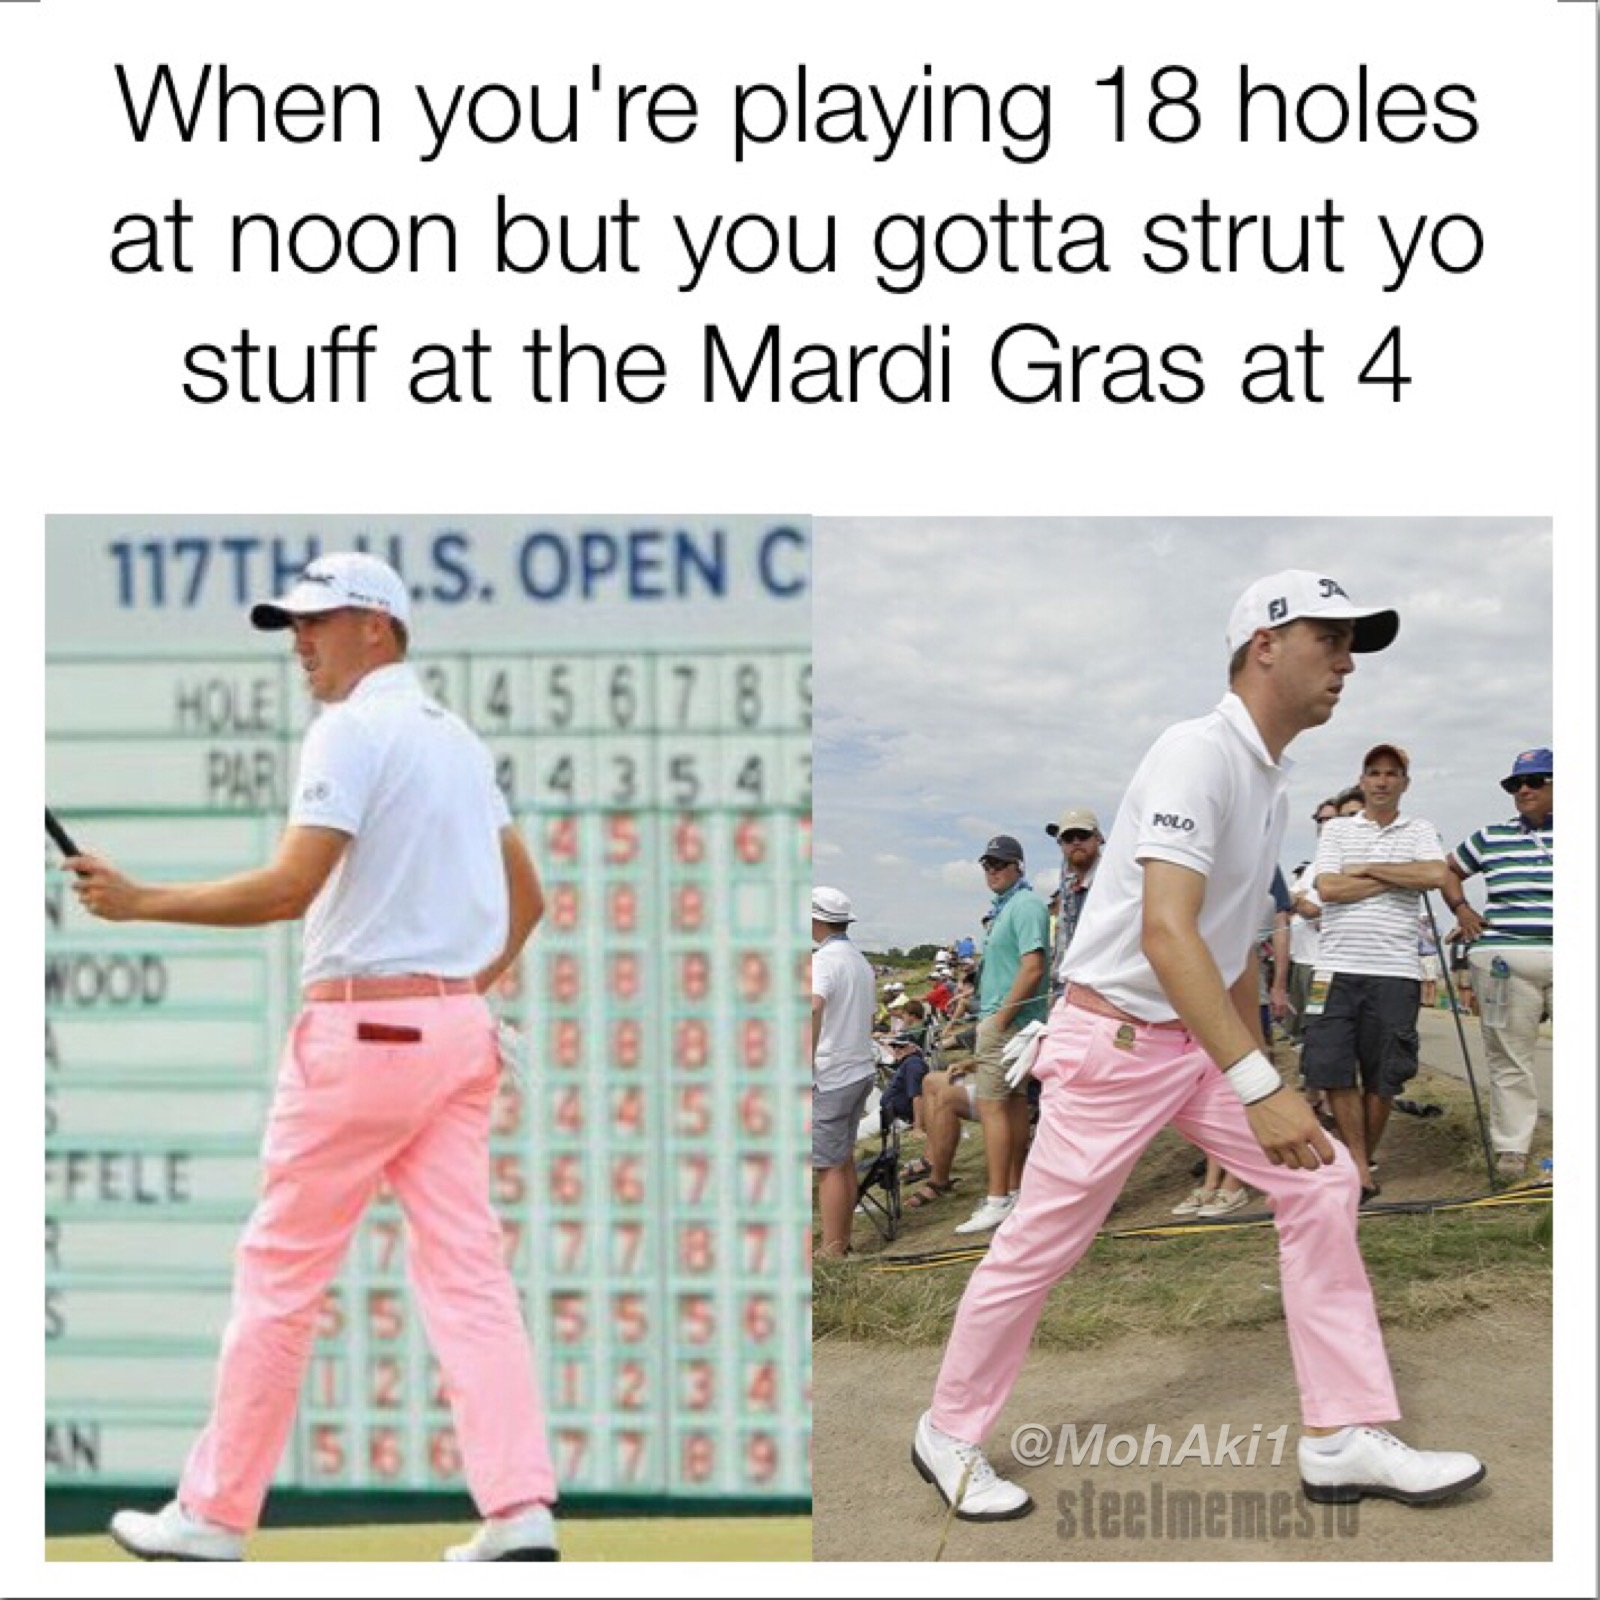 male - When you're playing 18 holes at noon but you gotta strut yo stuff at the Mardi Gras at 4 117TR Is. Open C 34.5 67 8. Moe con steelmemestu